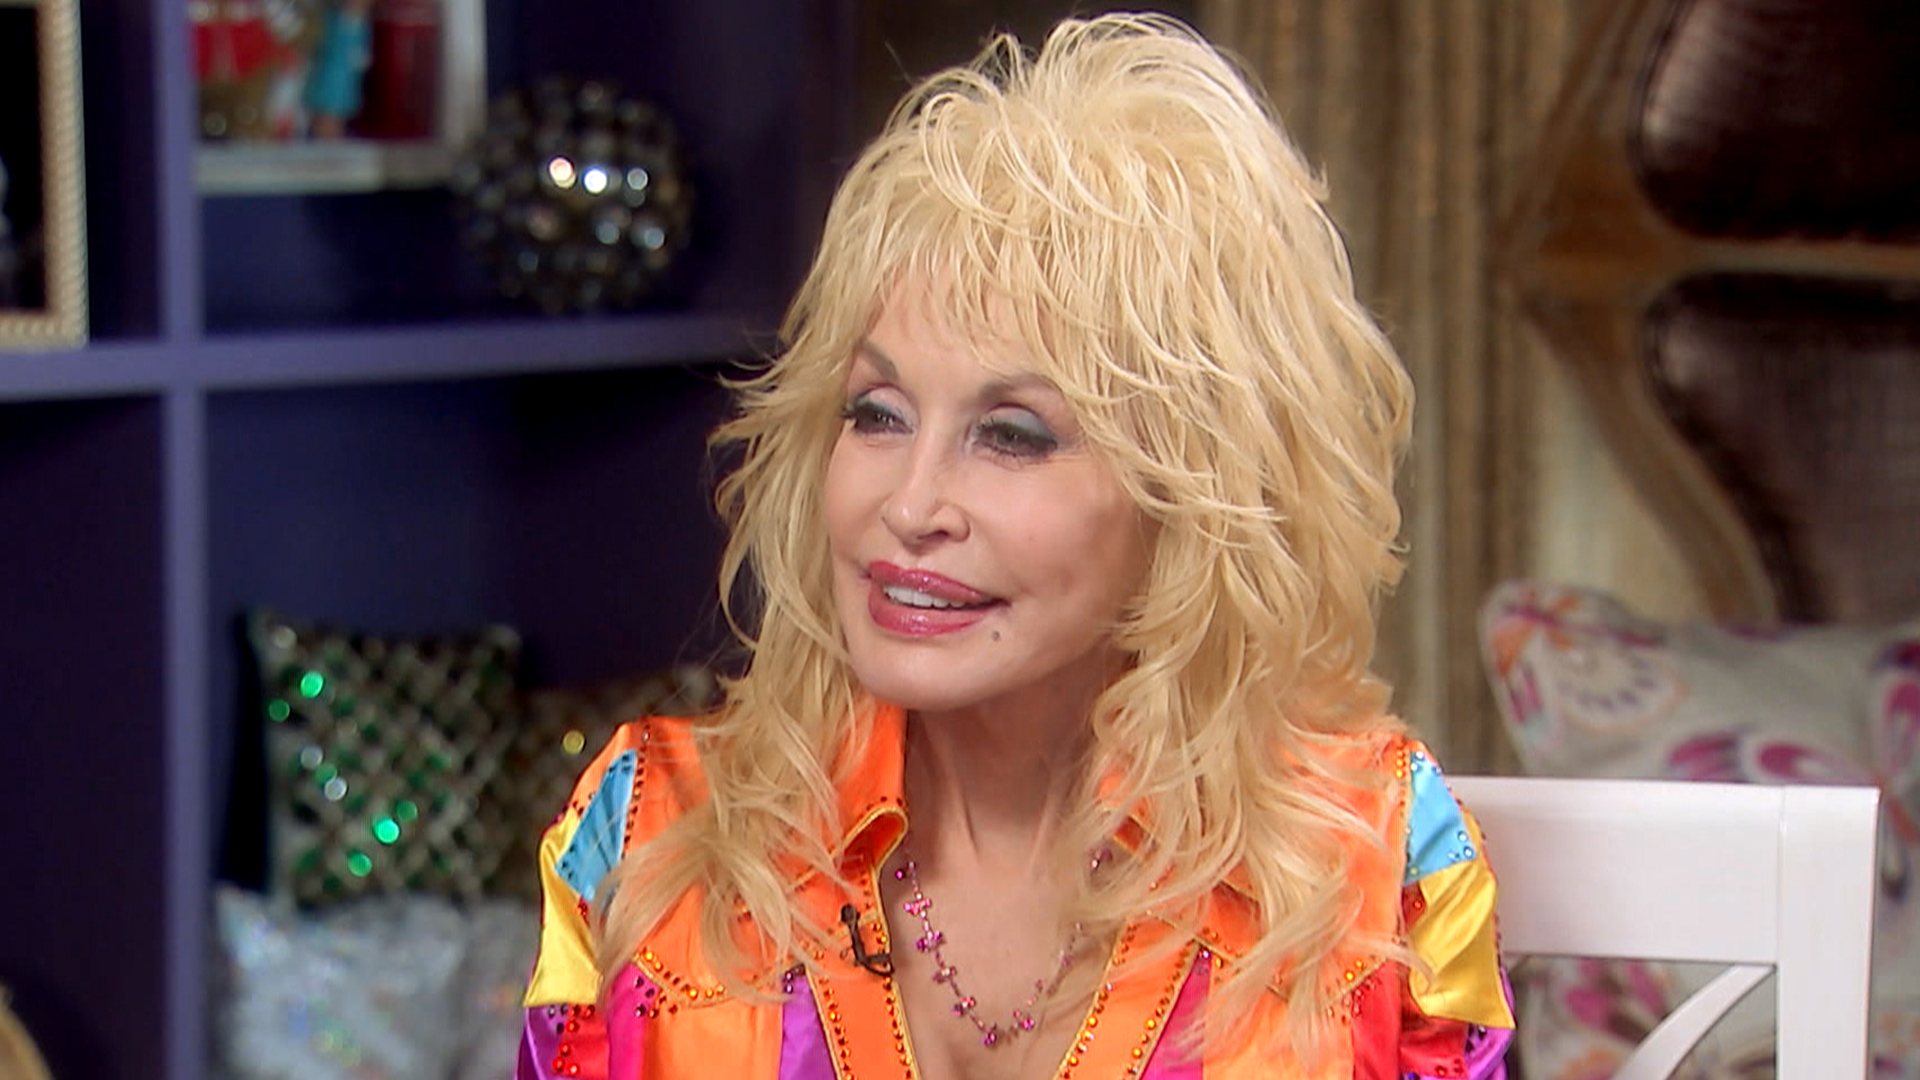 Dolly Parton on ‘Coat of Many Colors’: ‘I’ve been very blessed’ - TODAY.com1920 x 1080